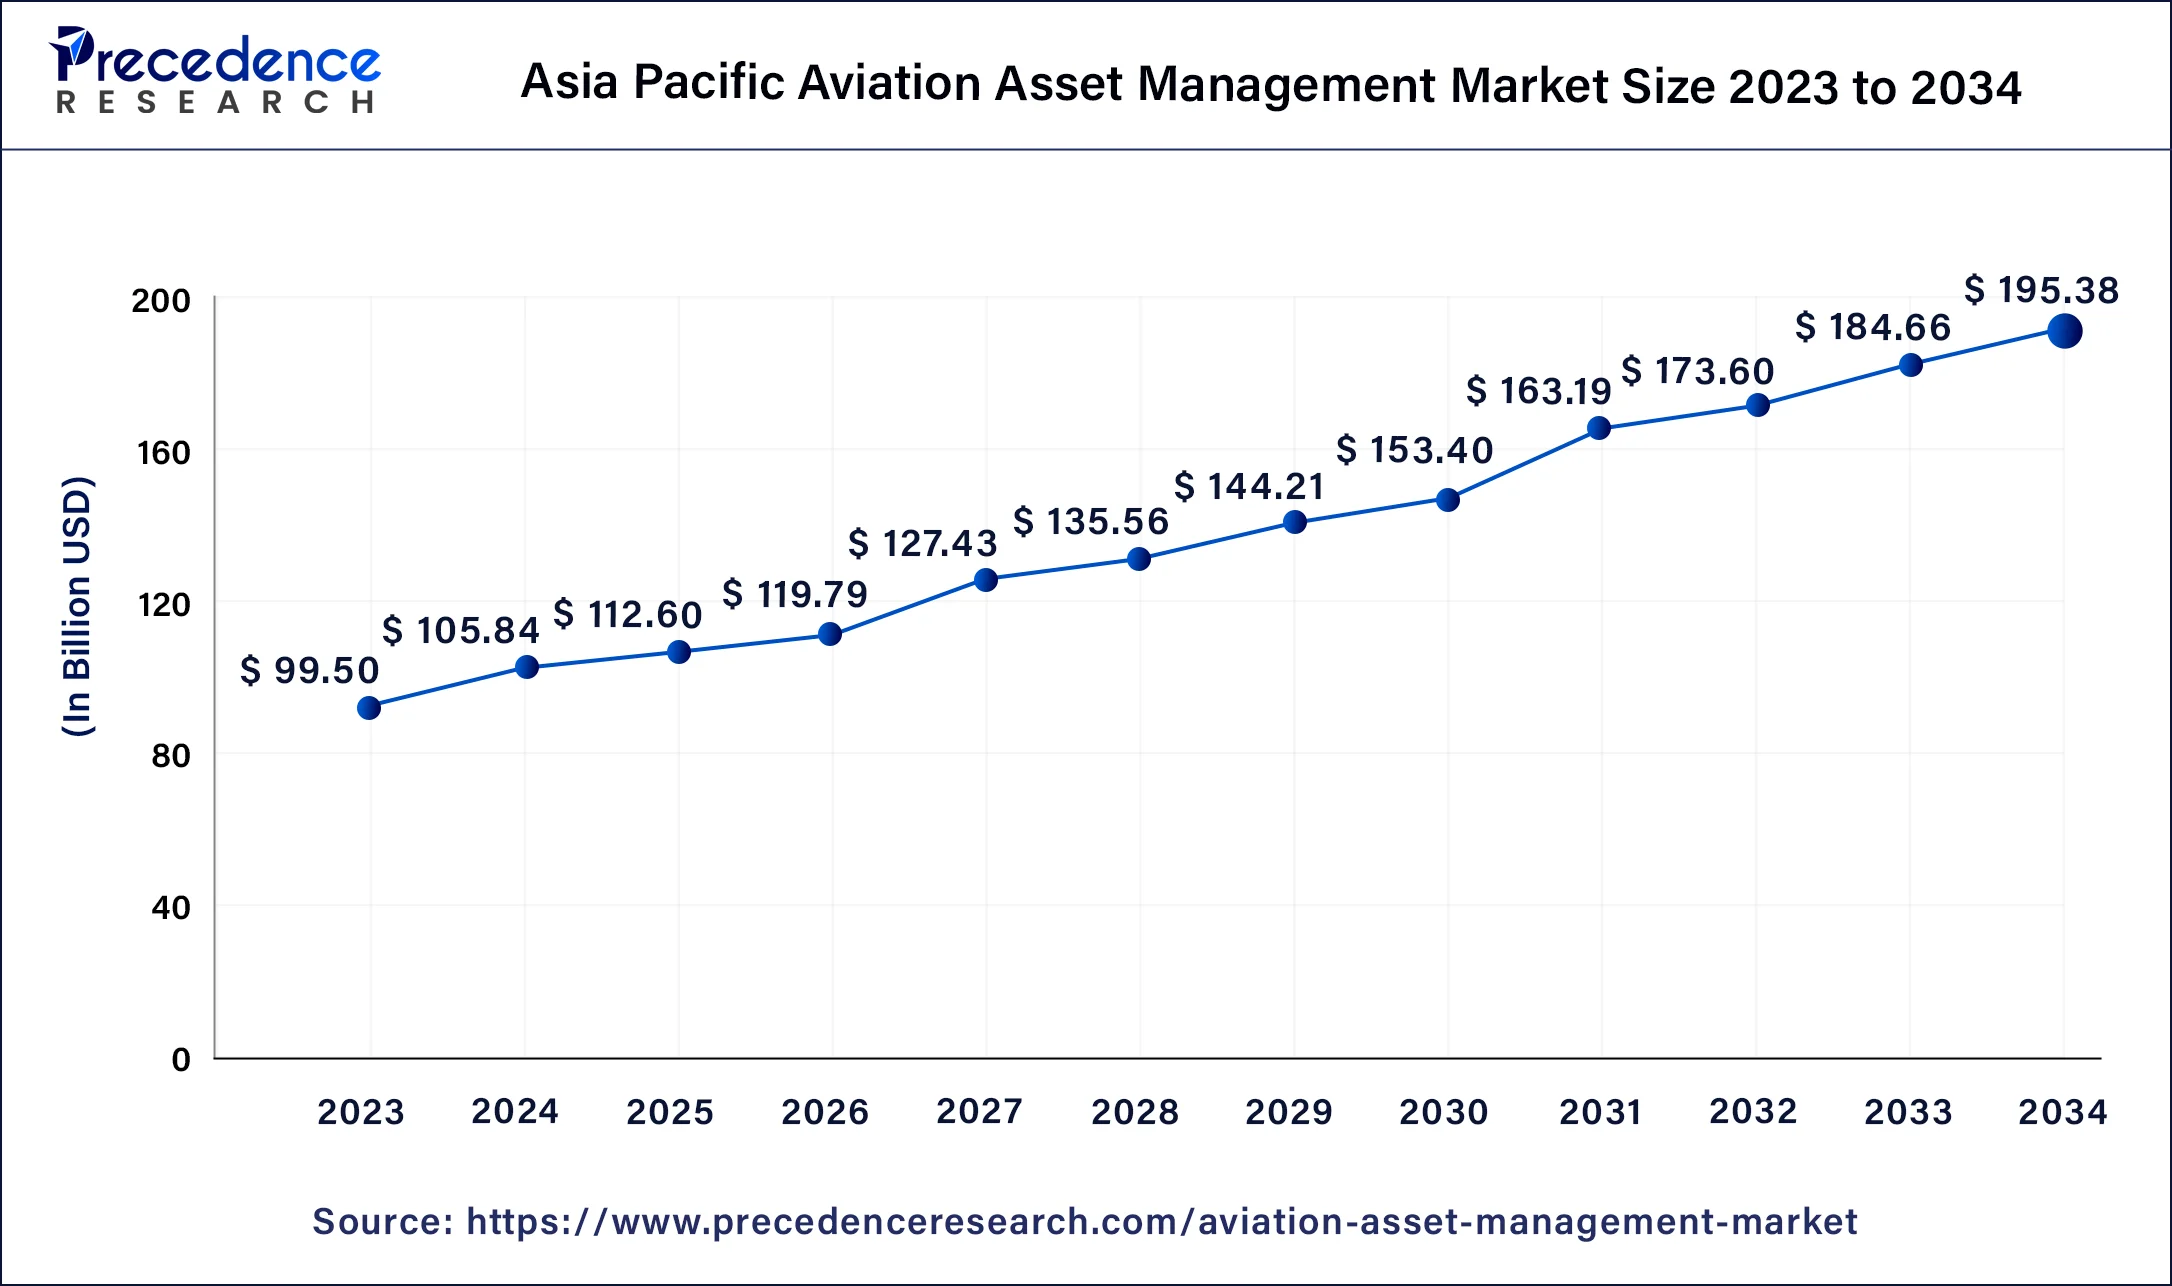 Asia Pacific Aviation Asset Management Market Size 2024 to 2034